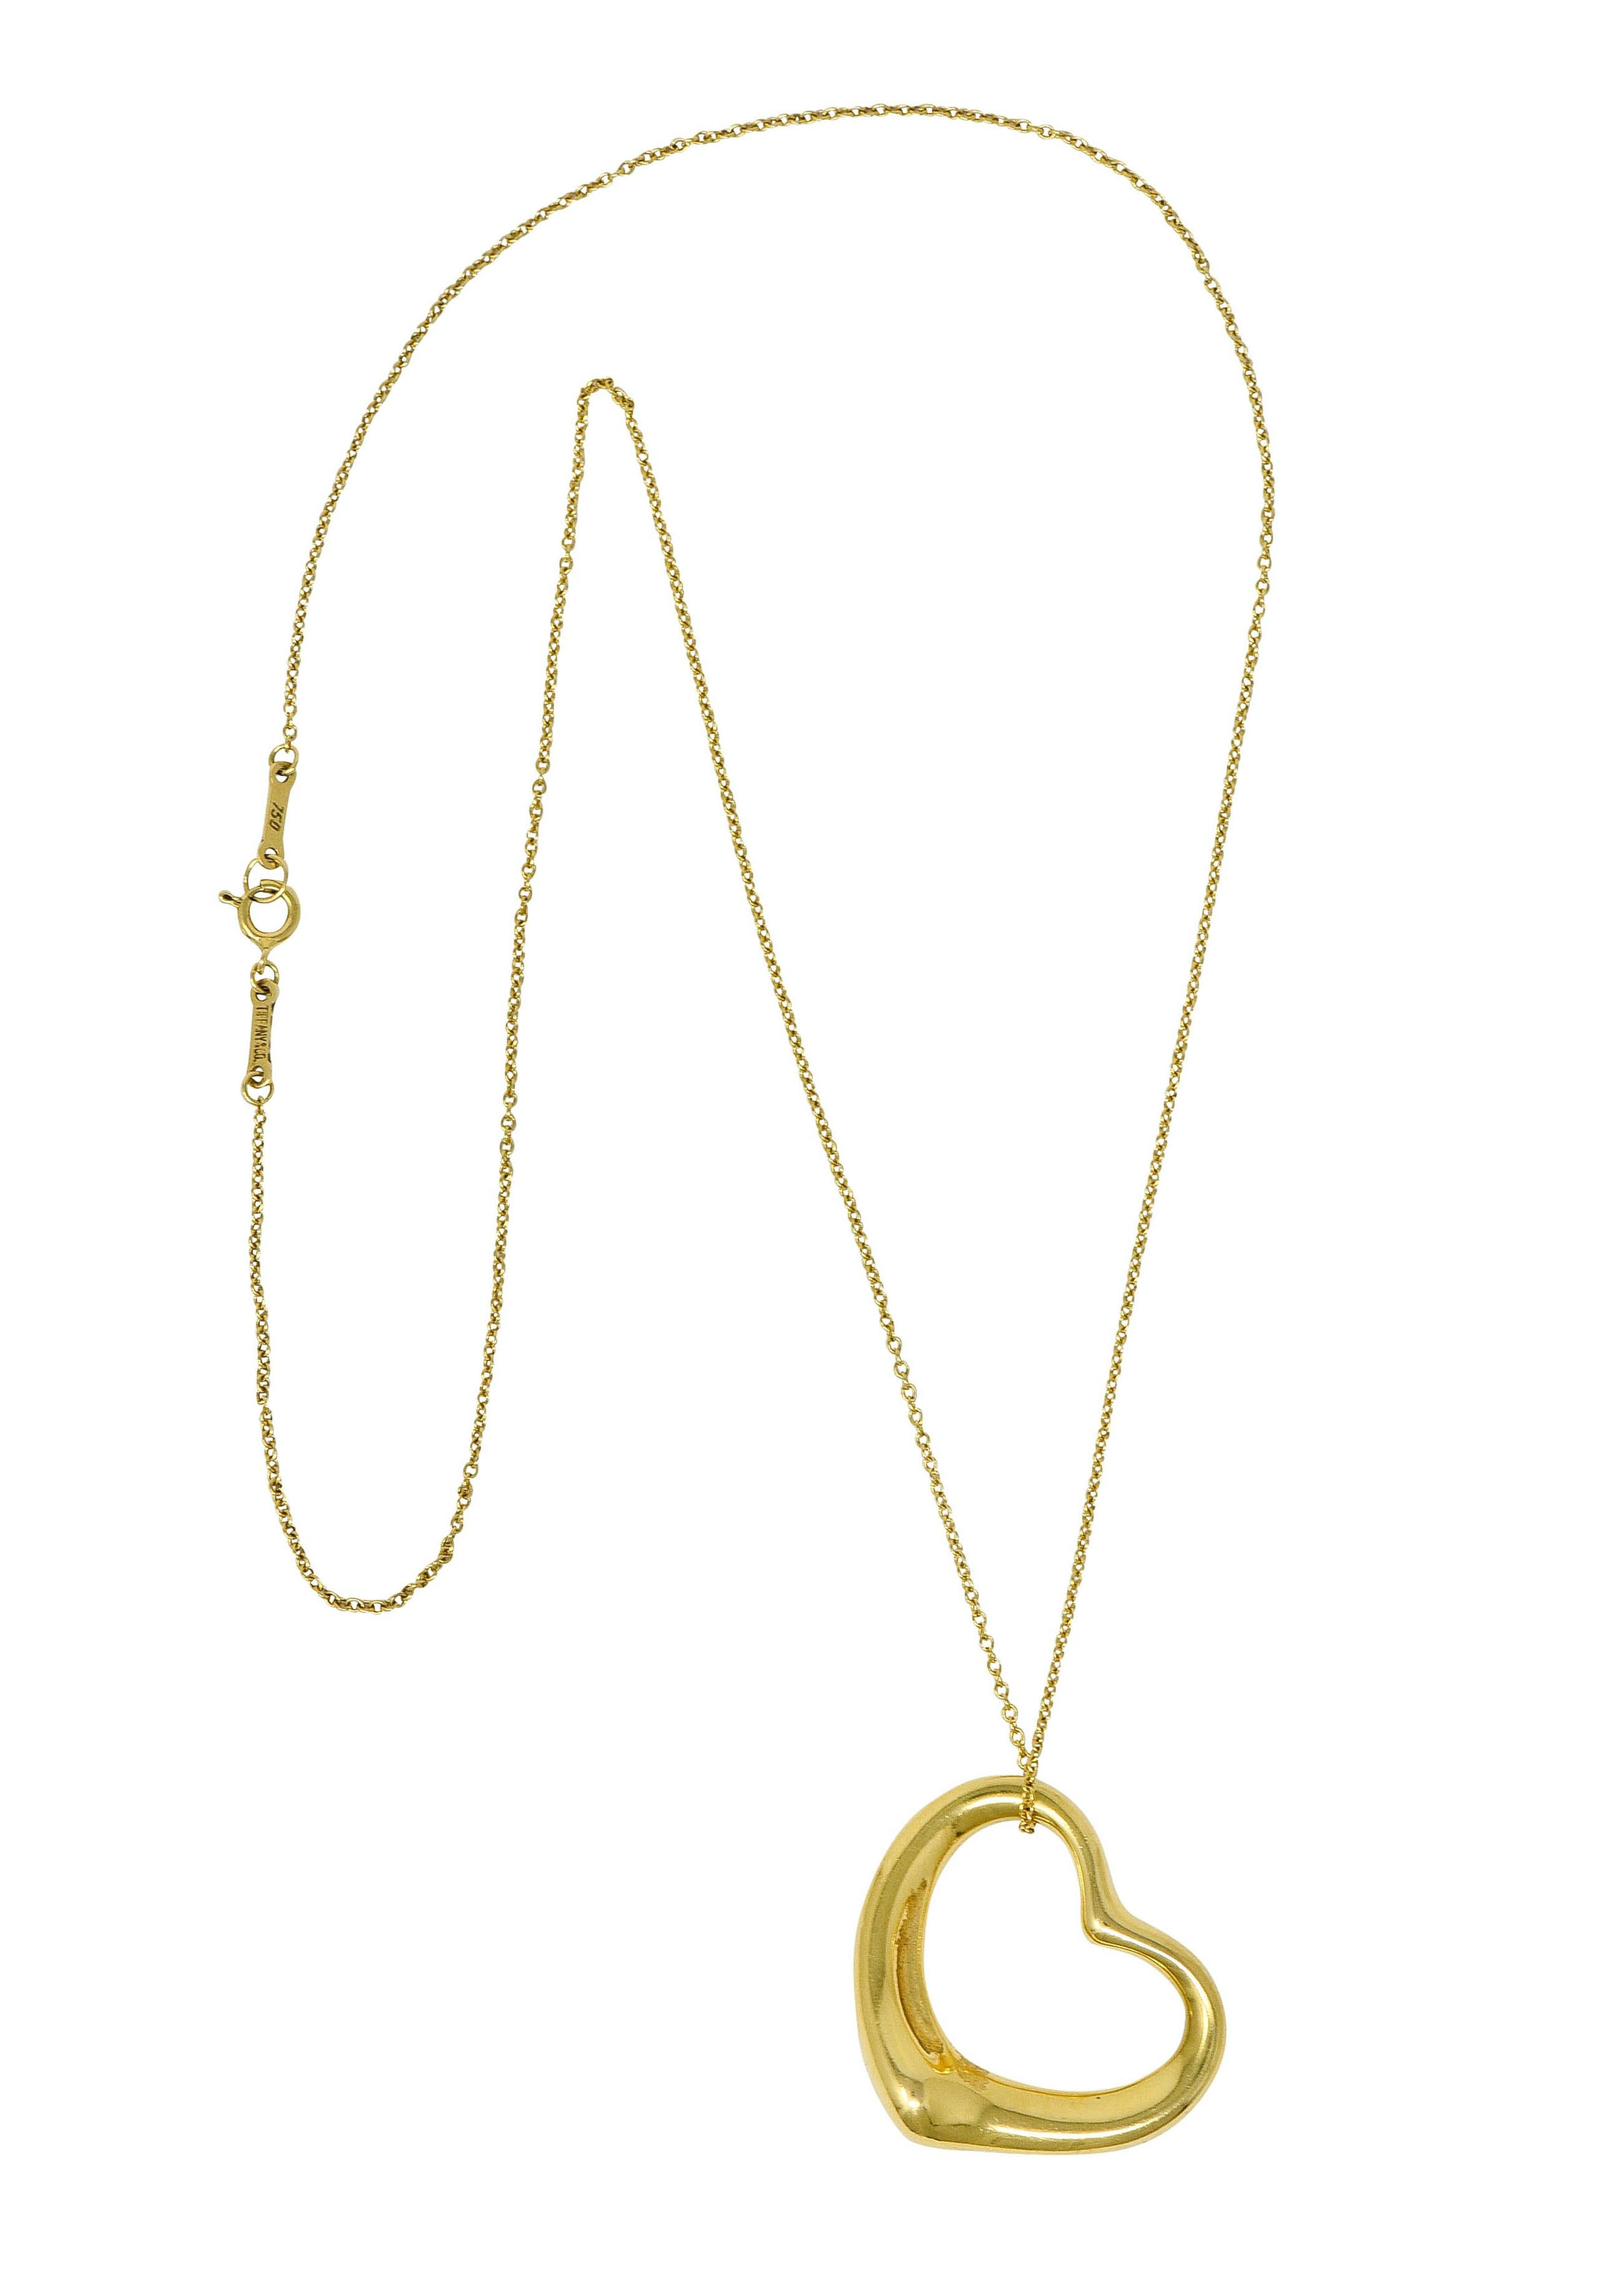 Pendant designed as polished gold open heart motif

Suspending from a classic gold cable chain completed by a spring ring clasp

Both are signed Tiffany & Co. Peretti Spain

Both stamped 750 for 18 karat gold

From the Open Heart collection, circa